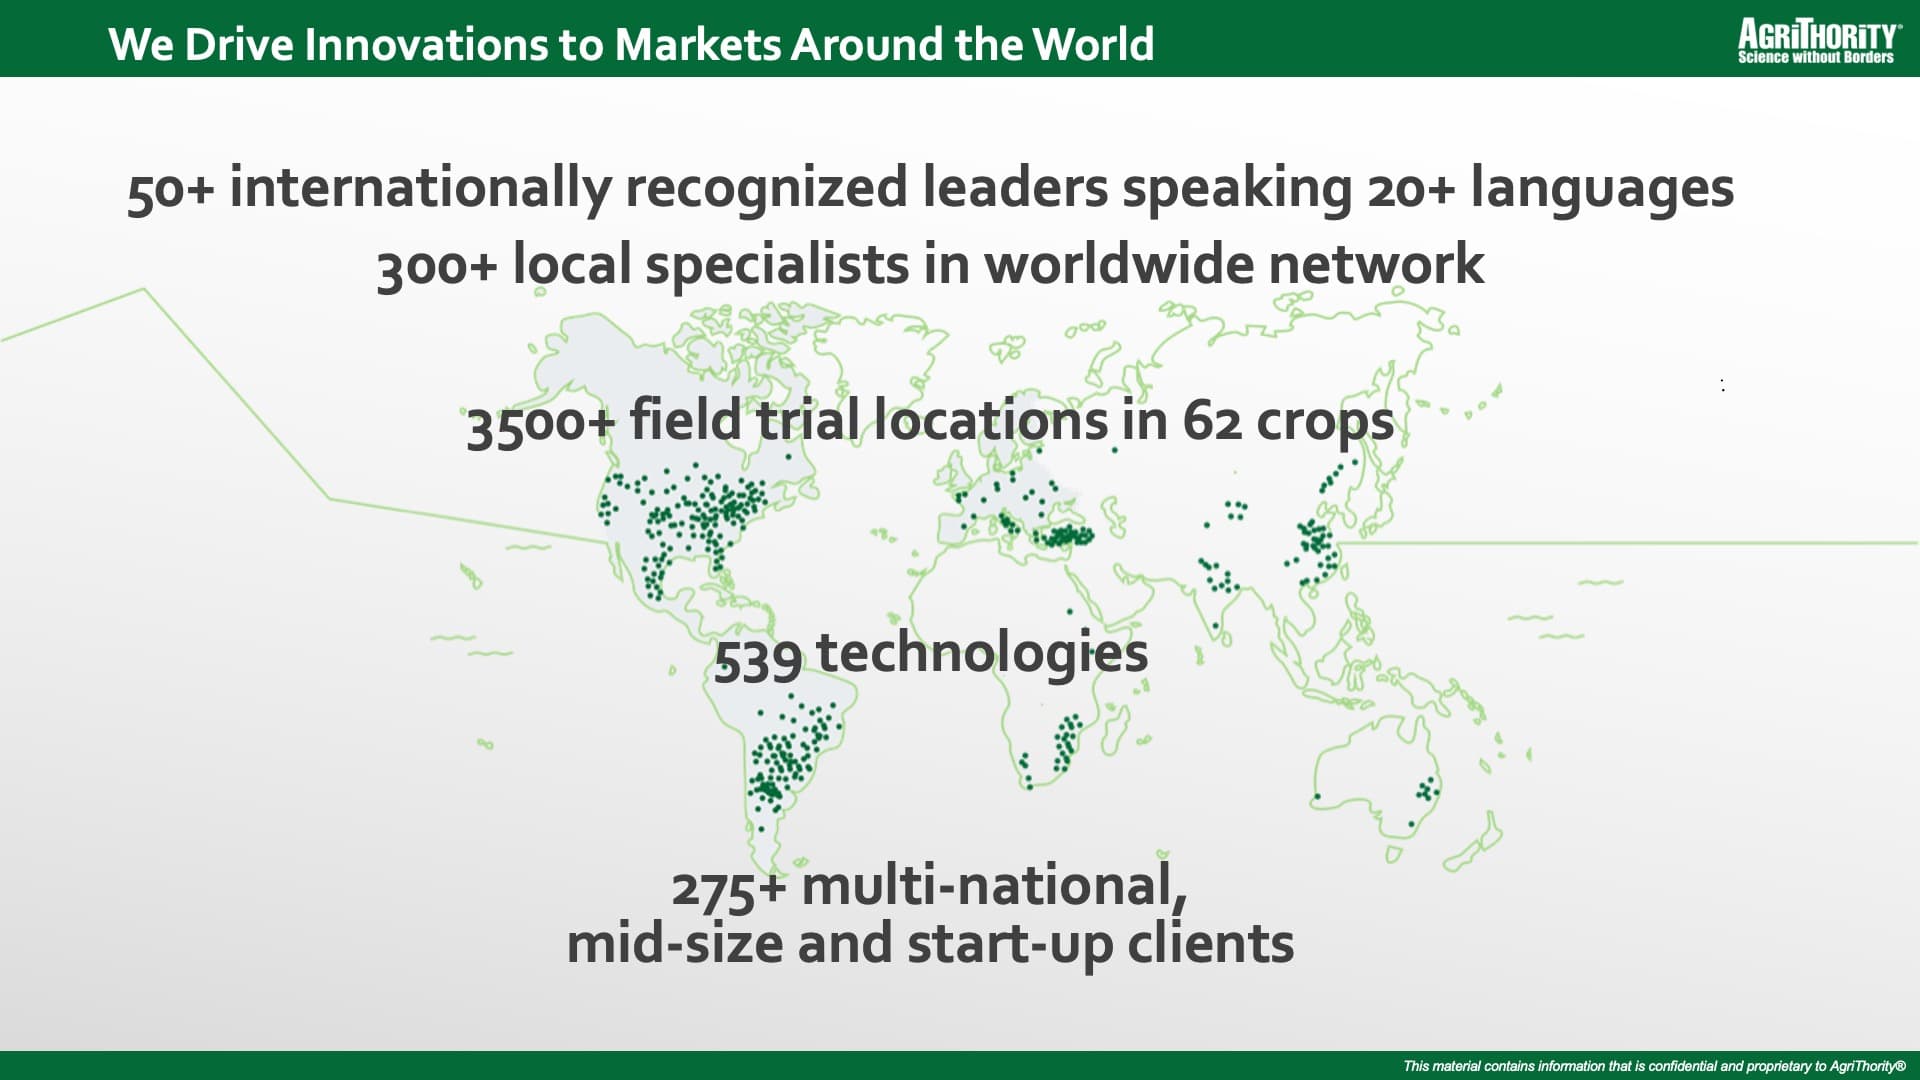 We Drive Innovations to Markets Around the World: 50+ internationally recognized leaders speaking 20+ languages, 300+ local specialists in worldwide network, 3500+ field trial locations in 62 crops, 539 technologies, 275+ multi-national, mid-size and start-up clients